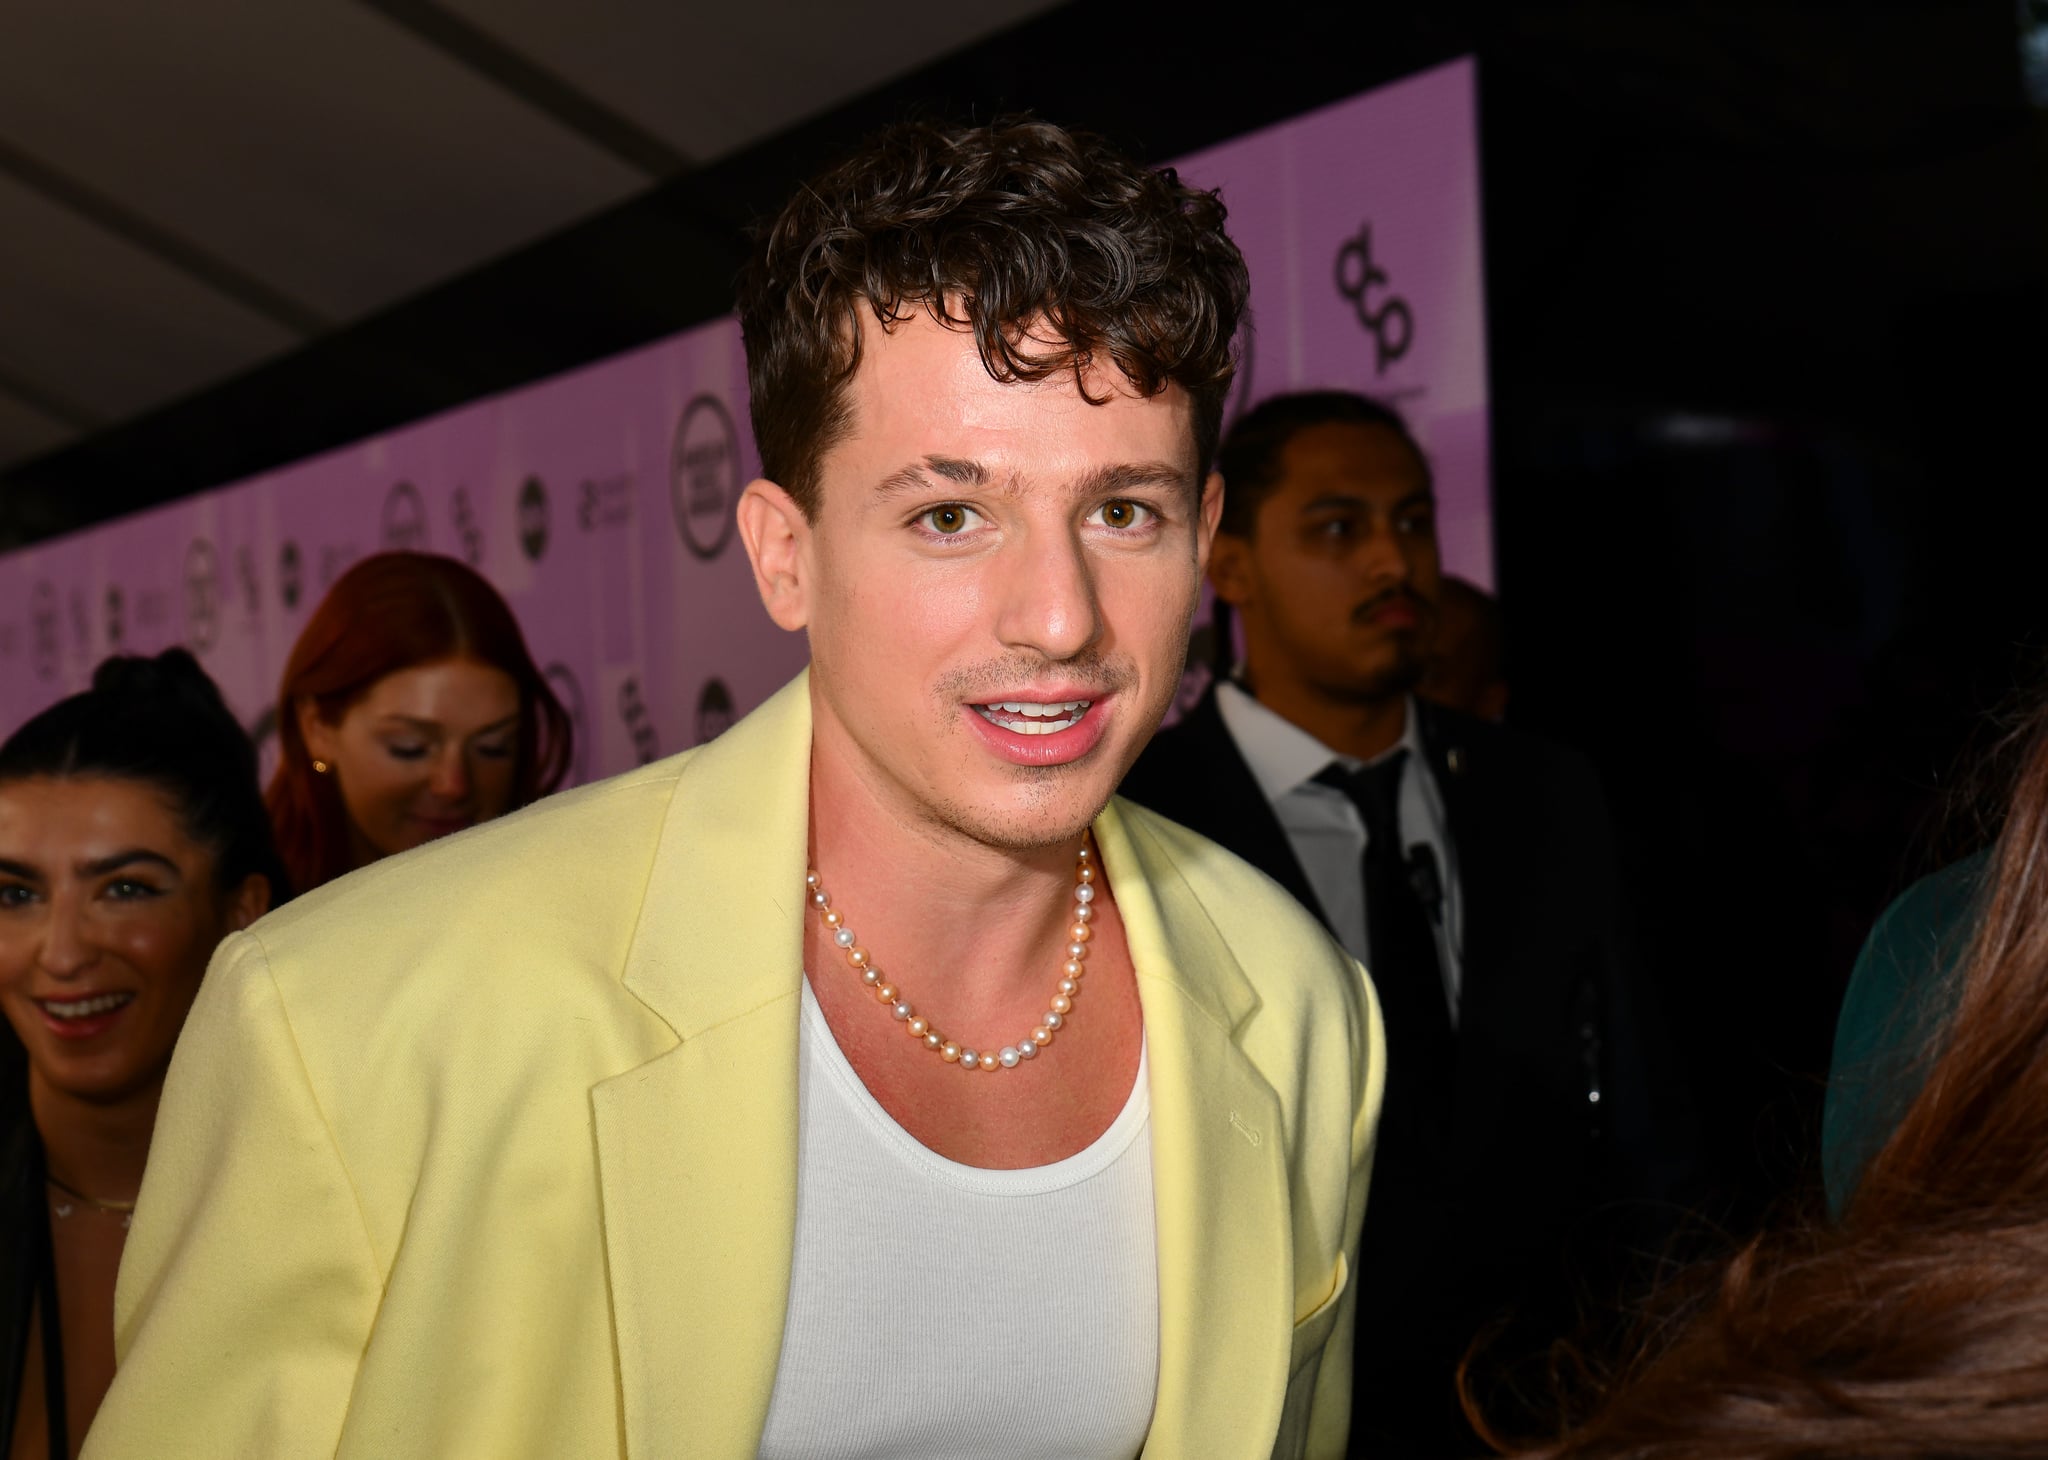 LOS ANGELES, CALIFORNIA - NOVEMBER 20: Charlie Puth attends the 2022 American Music Awards at Microsoft Theater on November 20, 2022 in Los Angeles, California. (Photo by Jerod Harris/Getty Images for dcp)